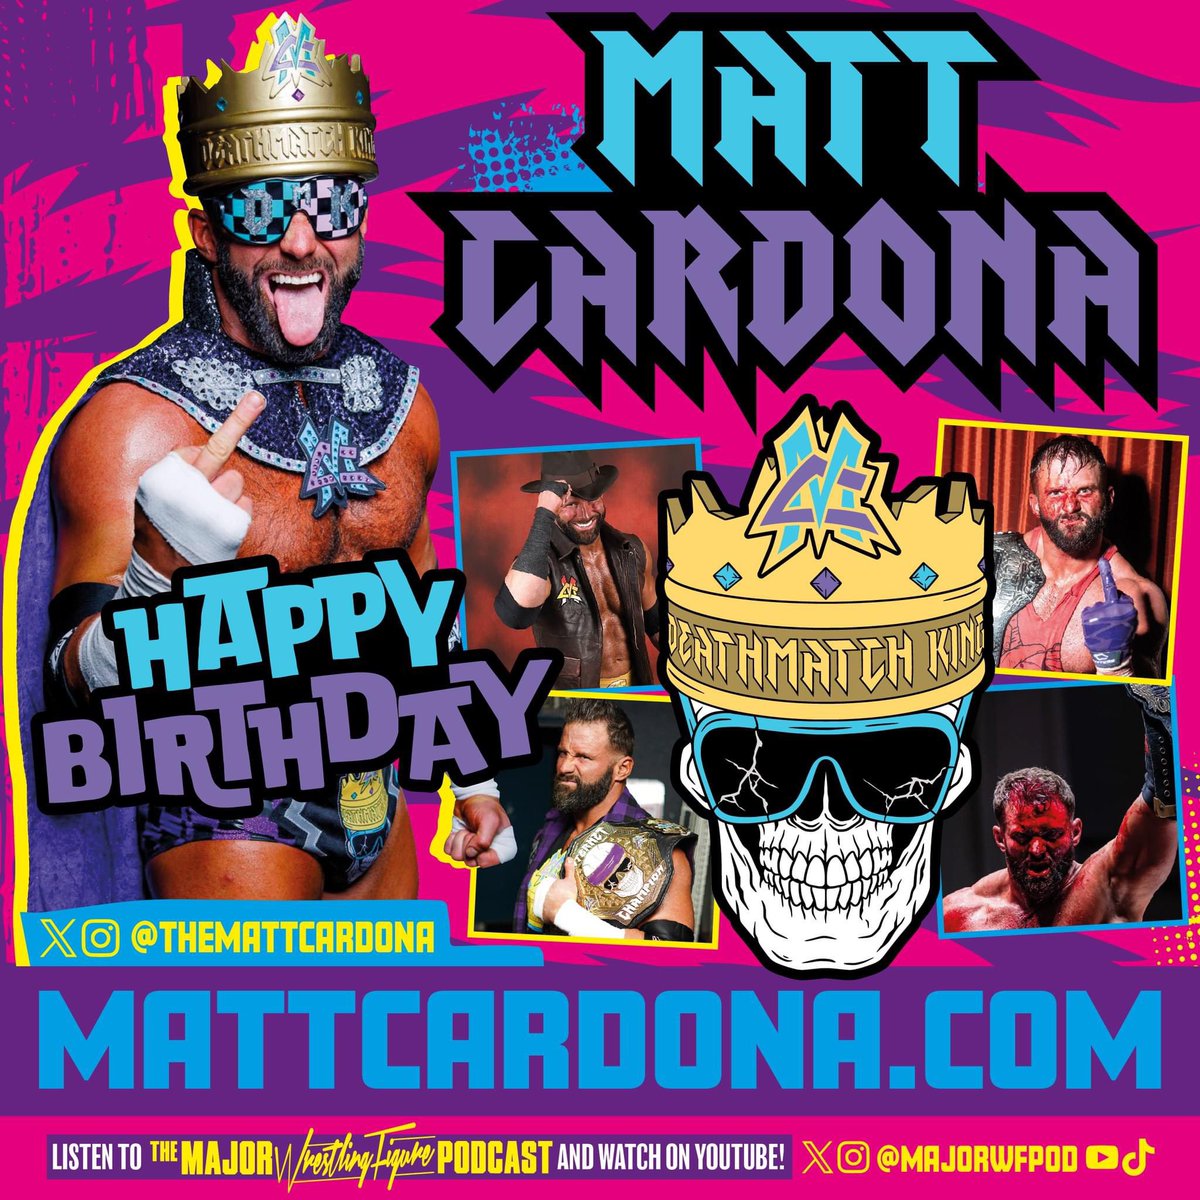 Happy birthday, @TheMattCardona! Without the Internet Champion, the idea of The Major Wrestling Figure Podcast doesn’t happen and thus, this journey for so many of us doesn’t begin. Join the Major Pod Team in sending Matt “Best Wishes” on his special day!